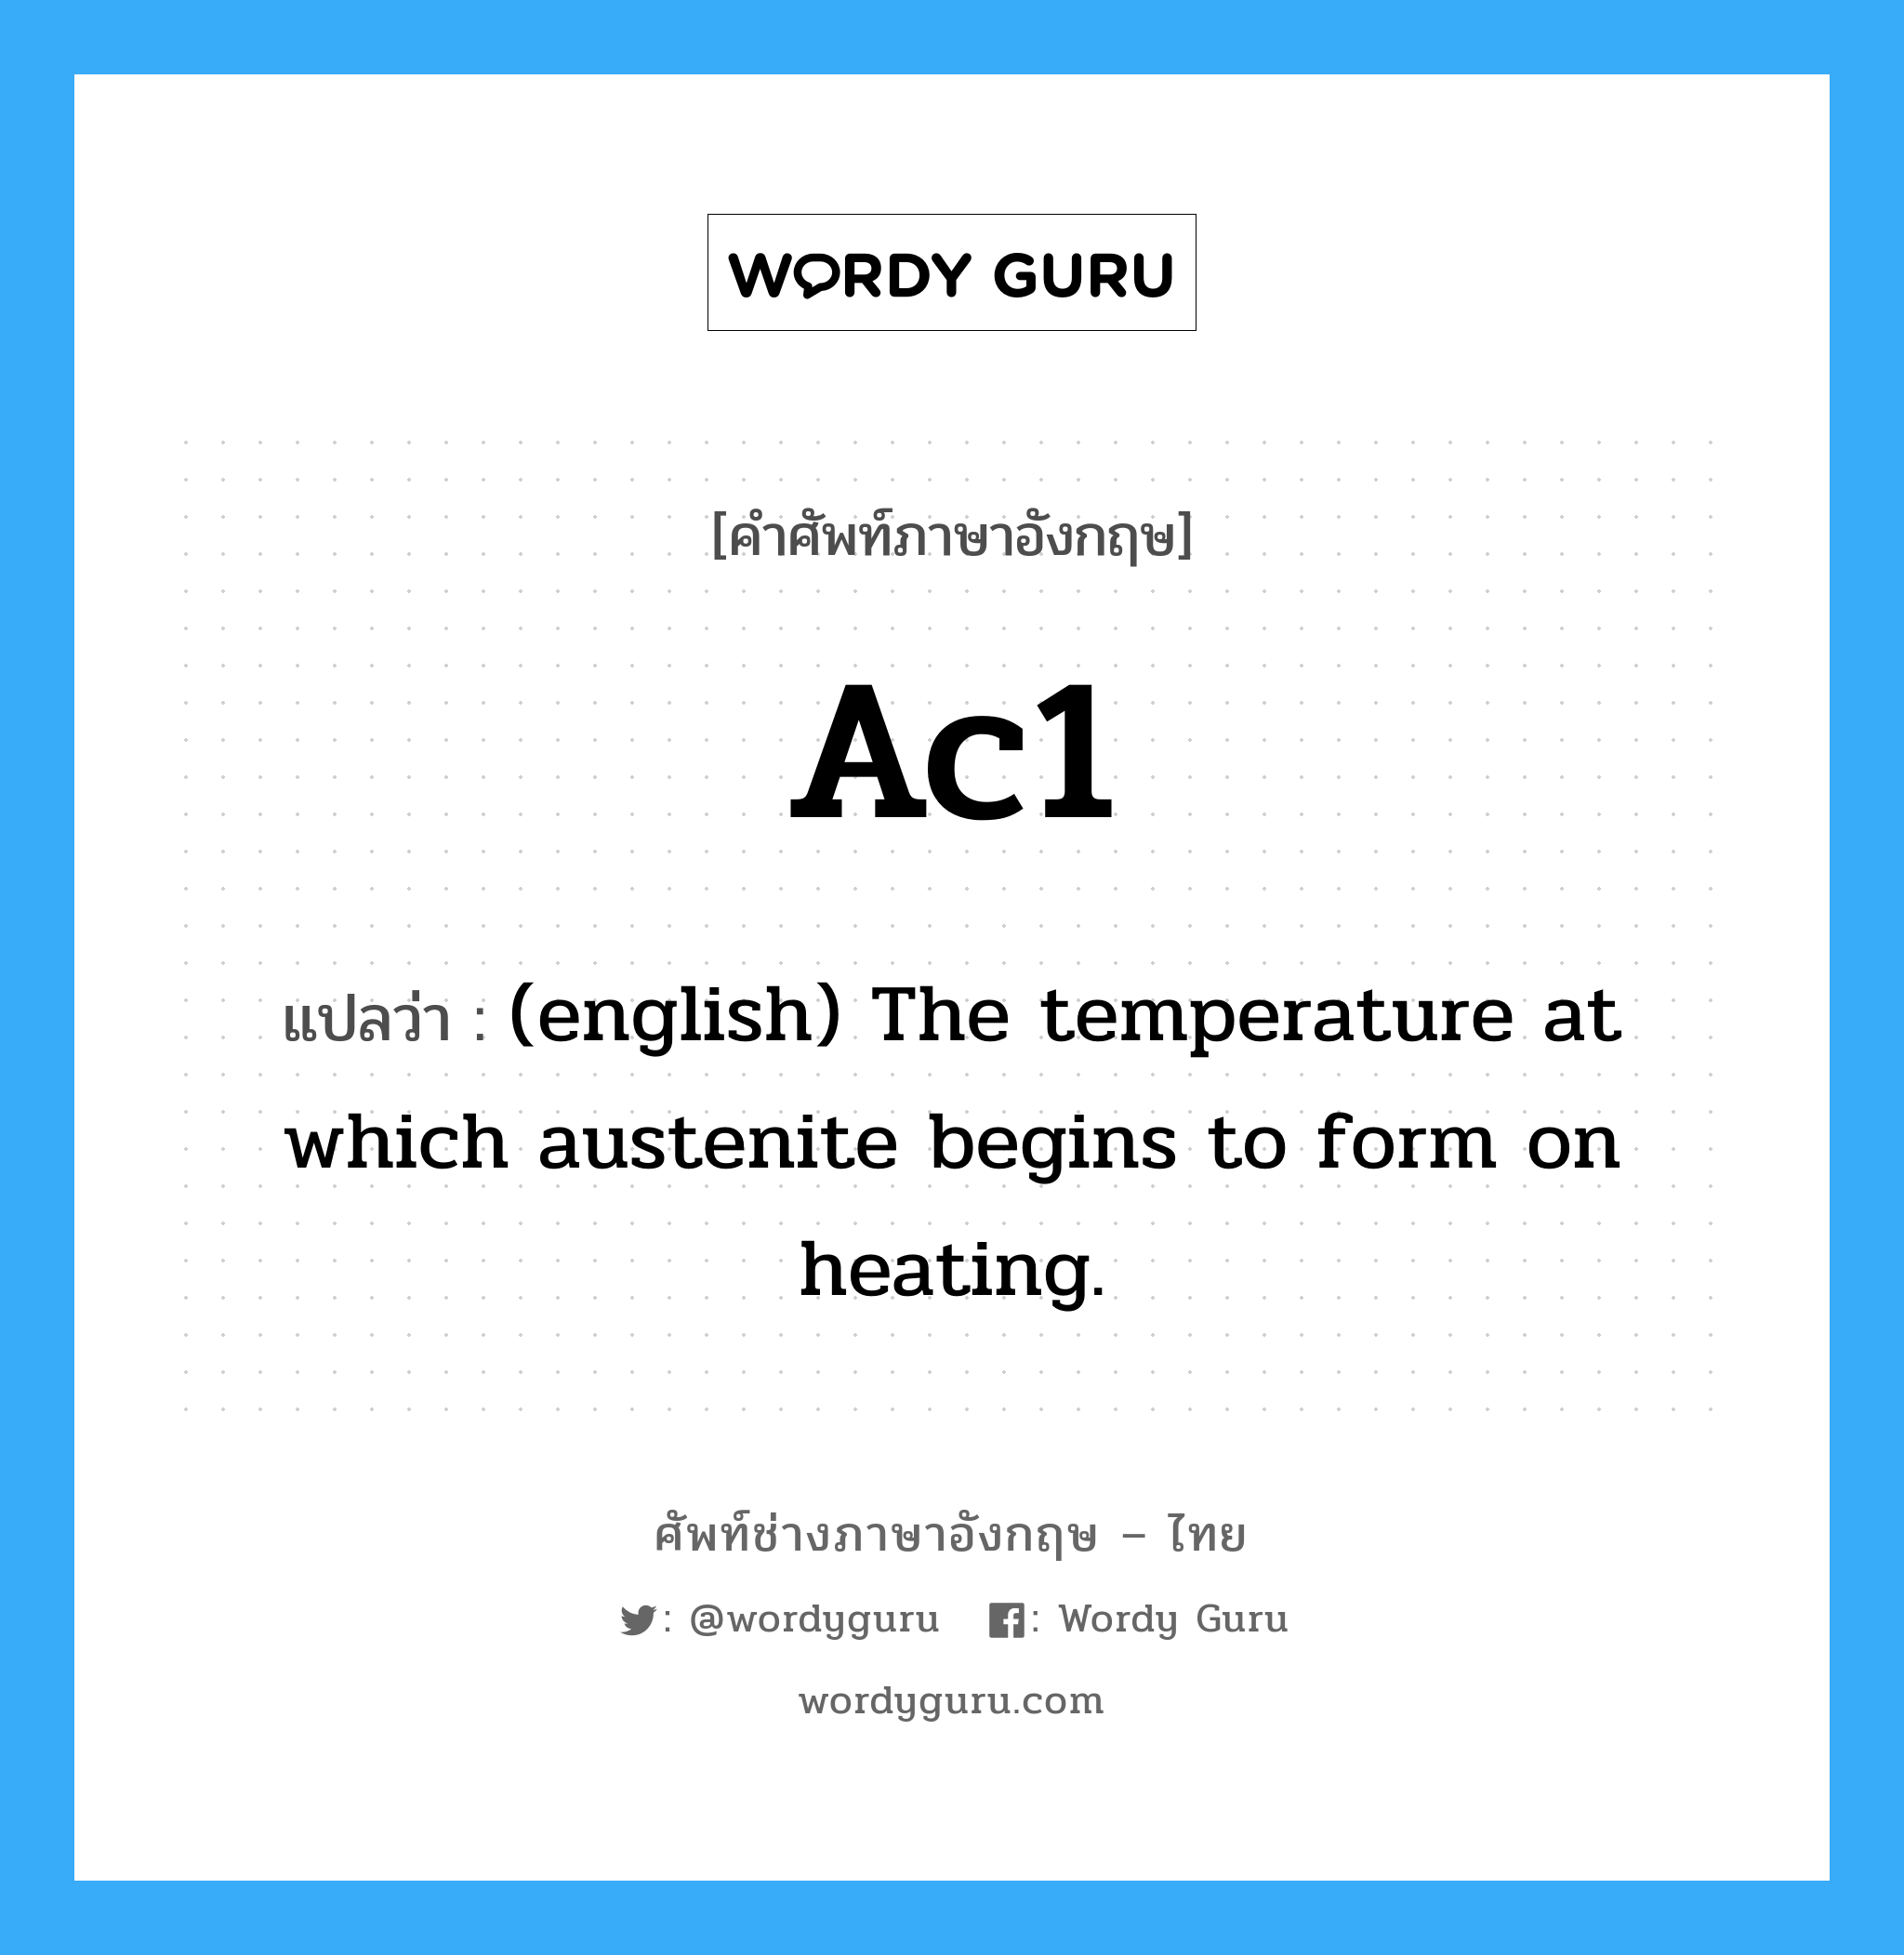 (english) The temperature at which austenite begins to form on heating. ภาษาอังกฤษ?, คำศัพท์ช่างภาษาอังกฤษ - ไทย (english) The temperature at which austenite begins to form on heating. คำศัพท์ภาษาอังกฤษ (english) The temperature at which austenite begins to form on heating. แปลว่า Ac1